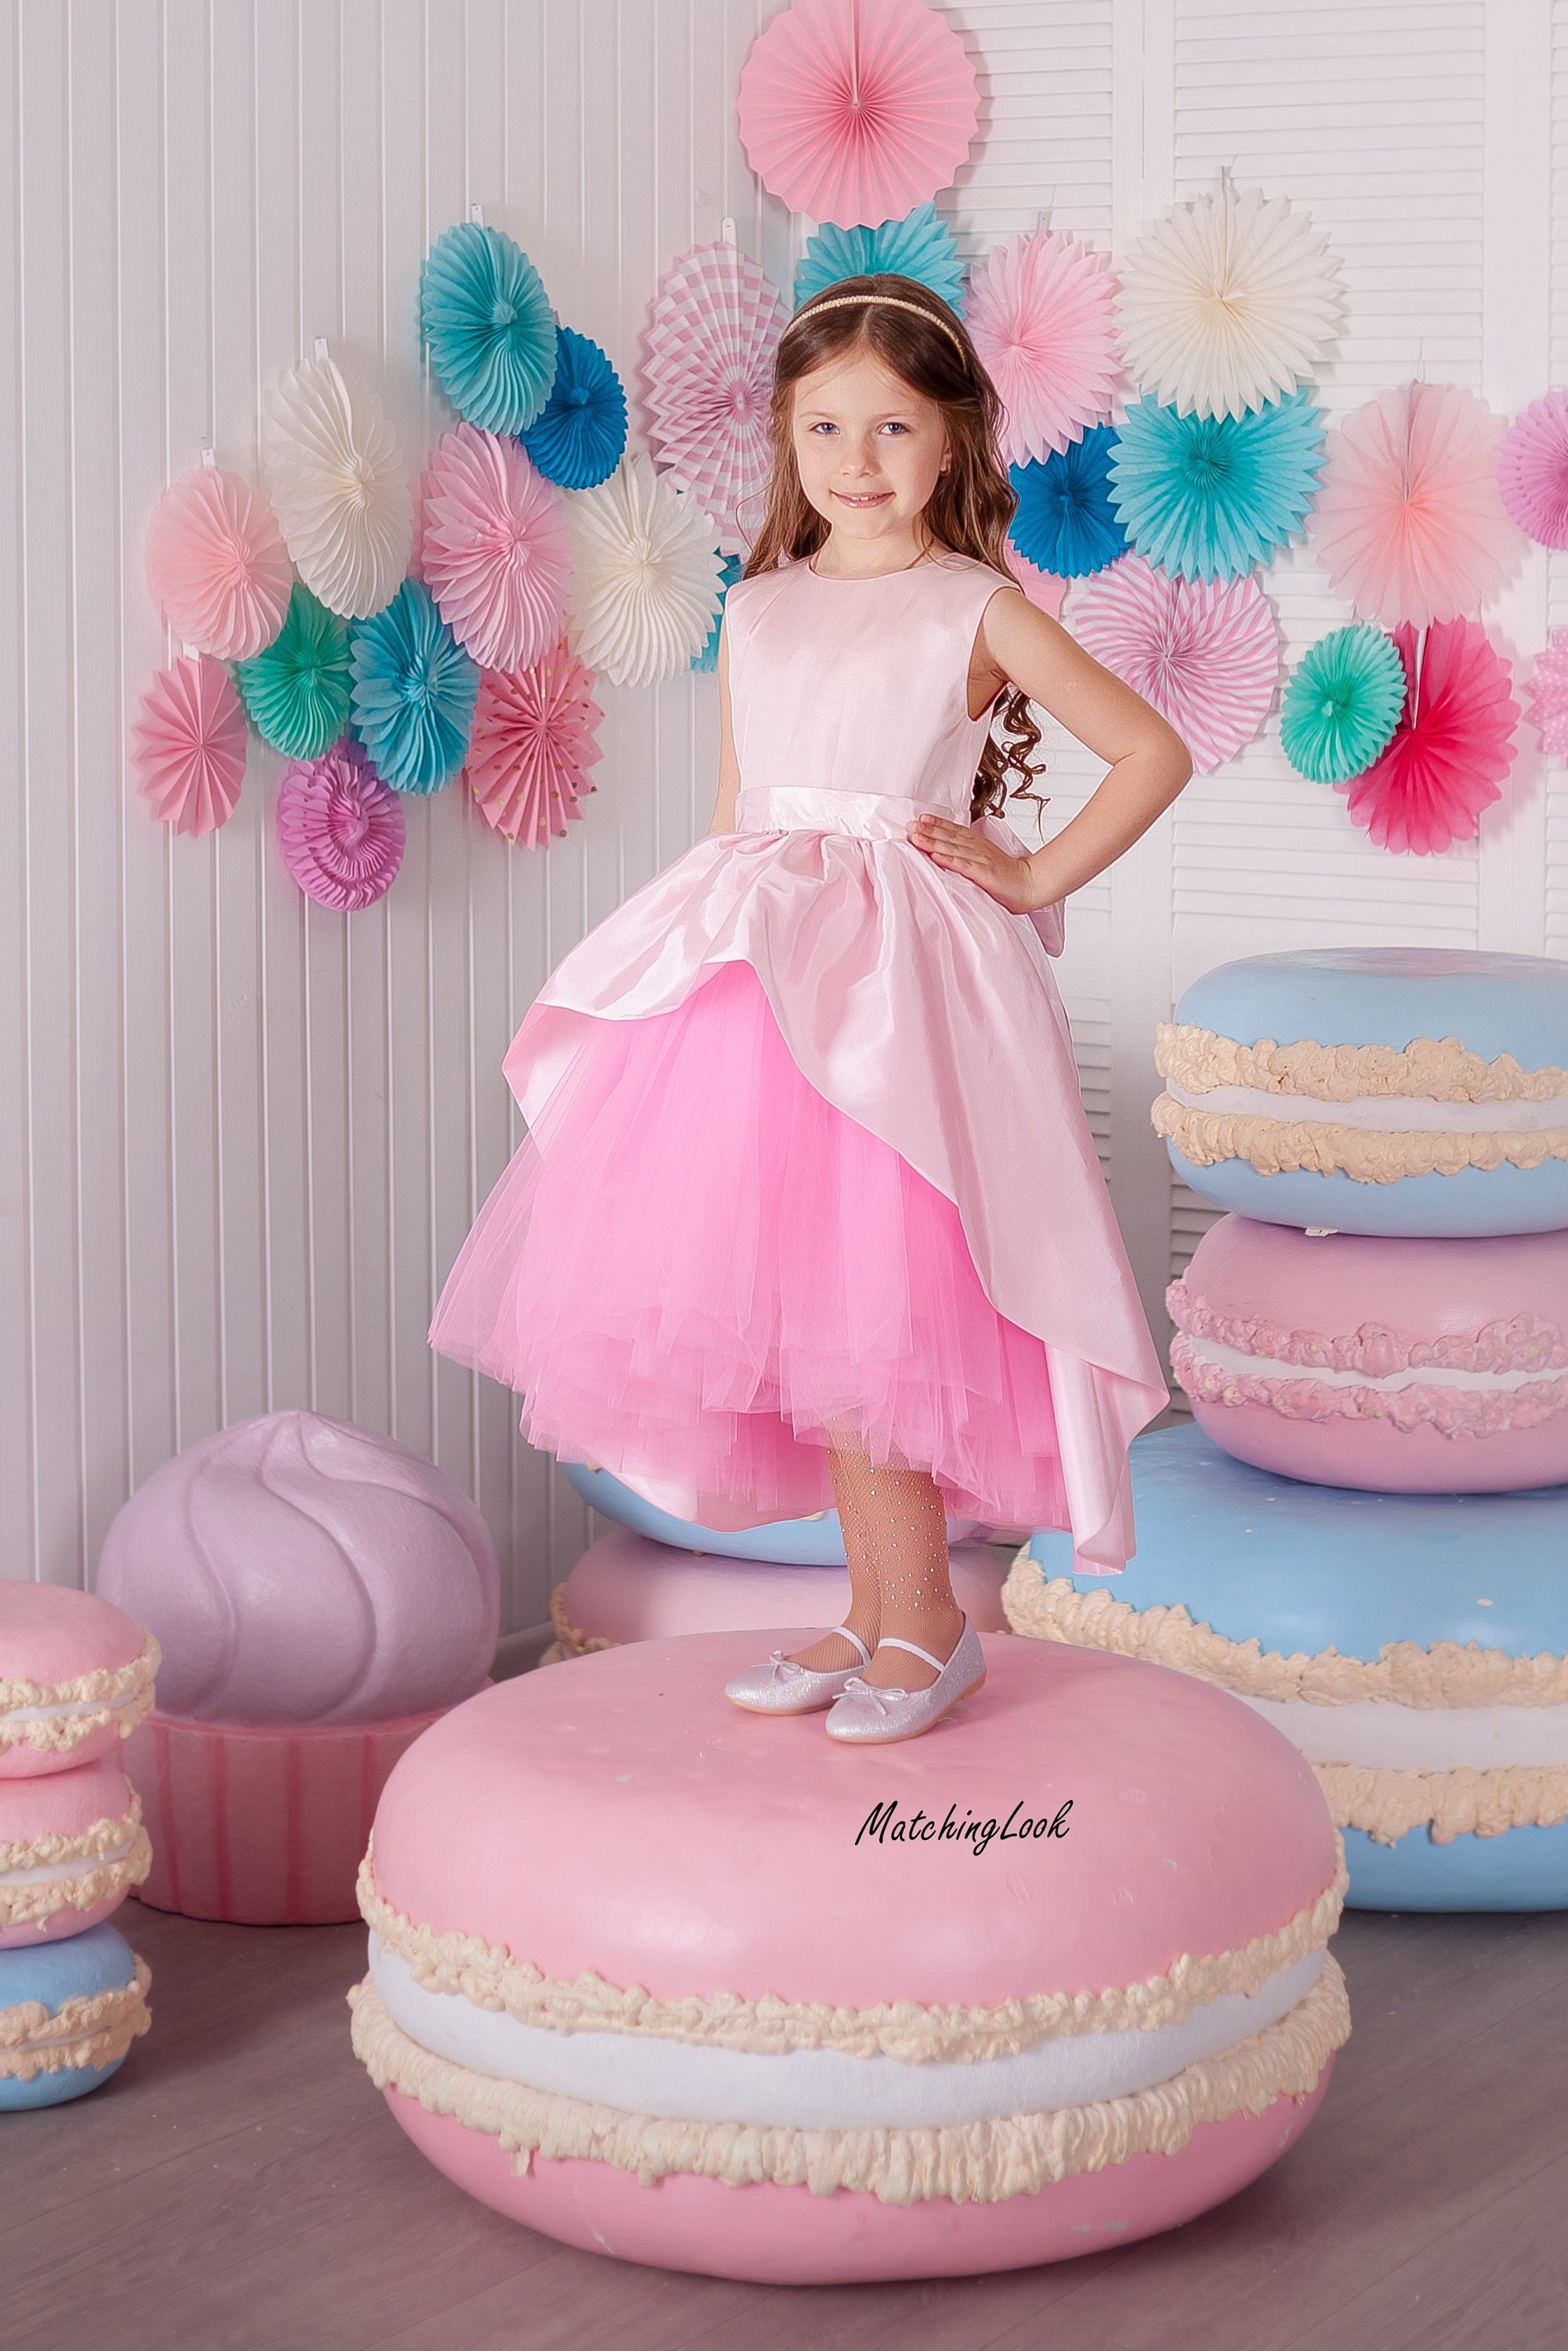 A Line Pink Dress Soft Tulle Gown for Kids Cute Girls' Birthday Dress –  Avadress